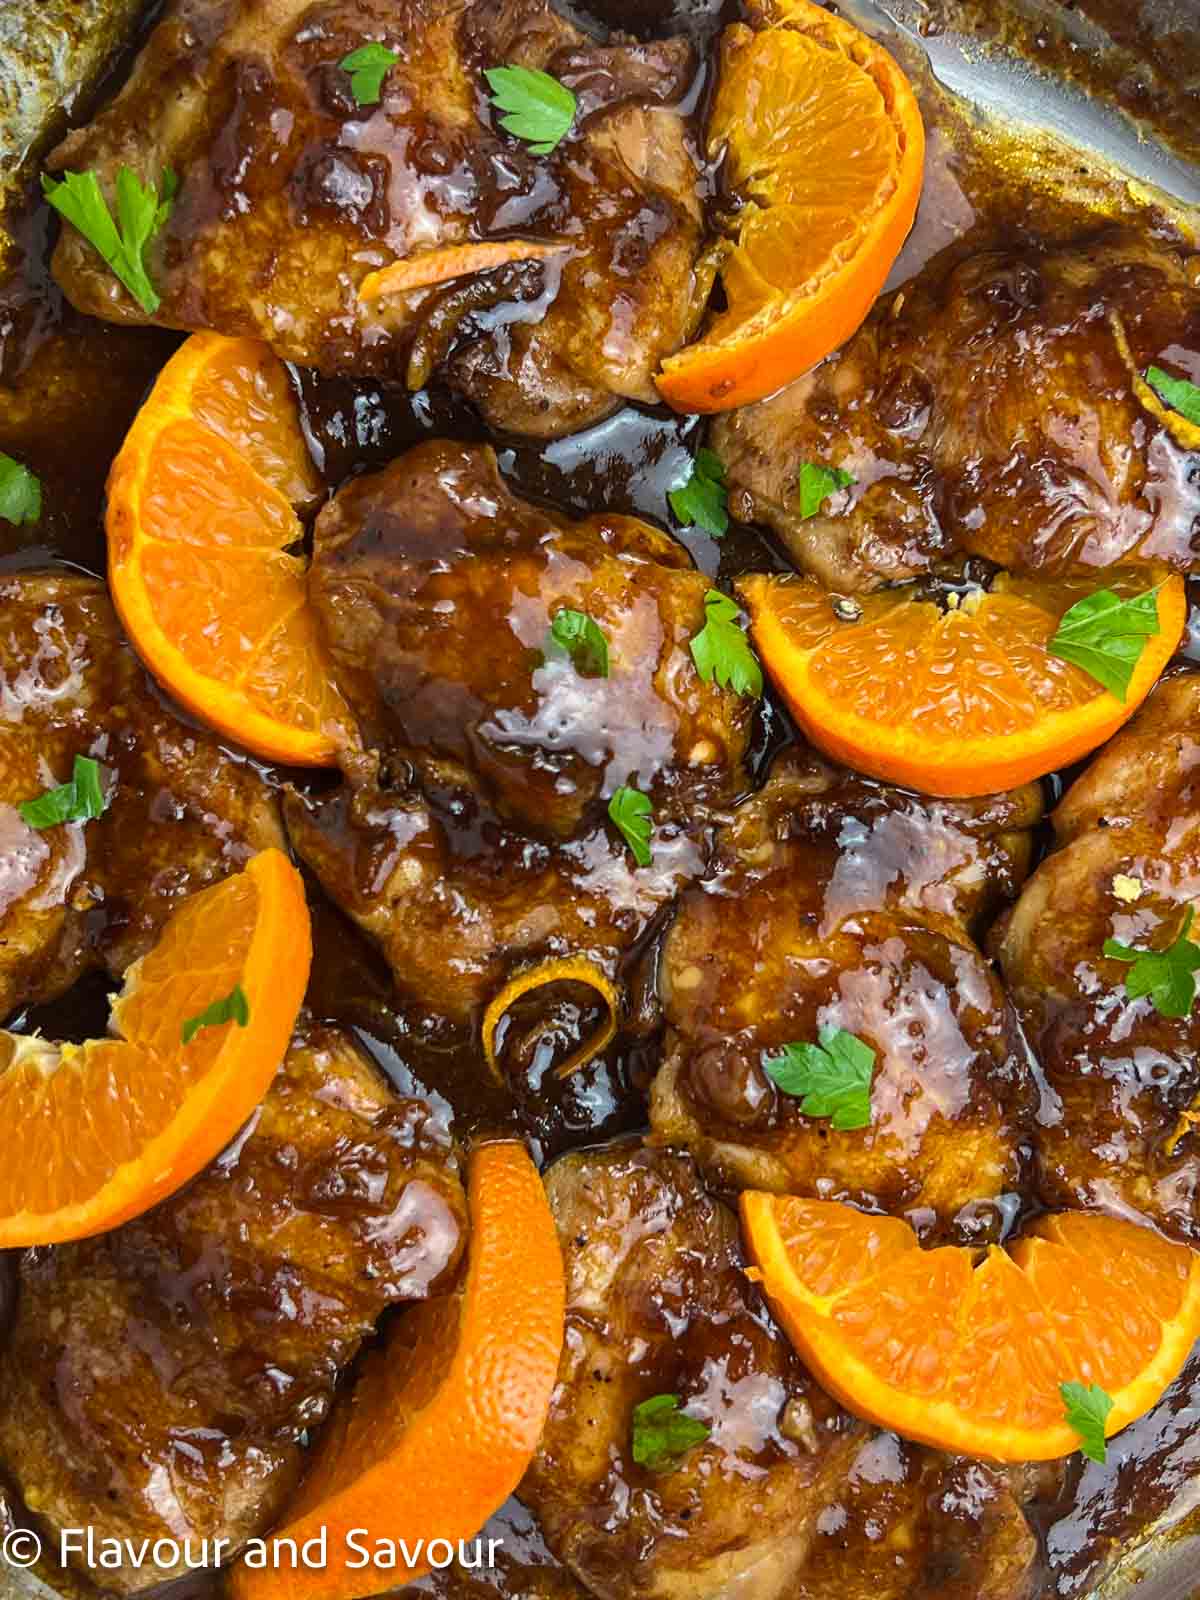 Glazed chicken thighs with hoisin sauce and sliced oranges.